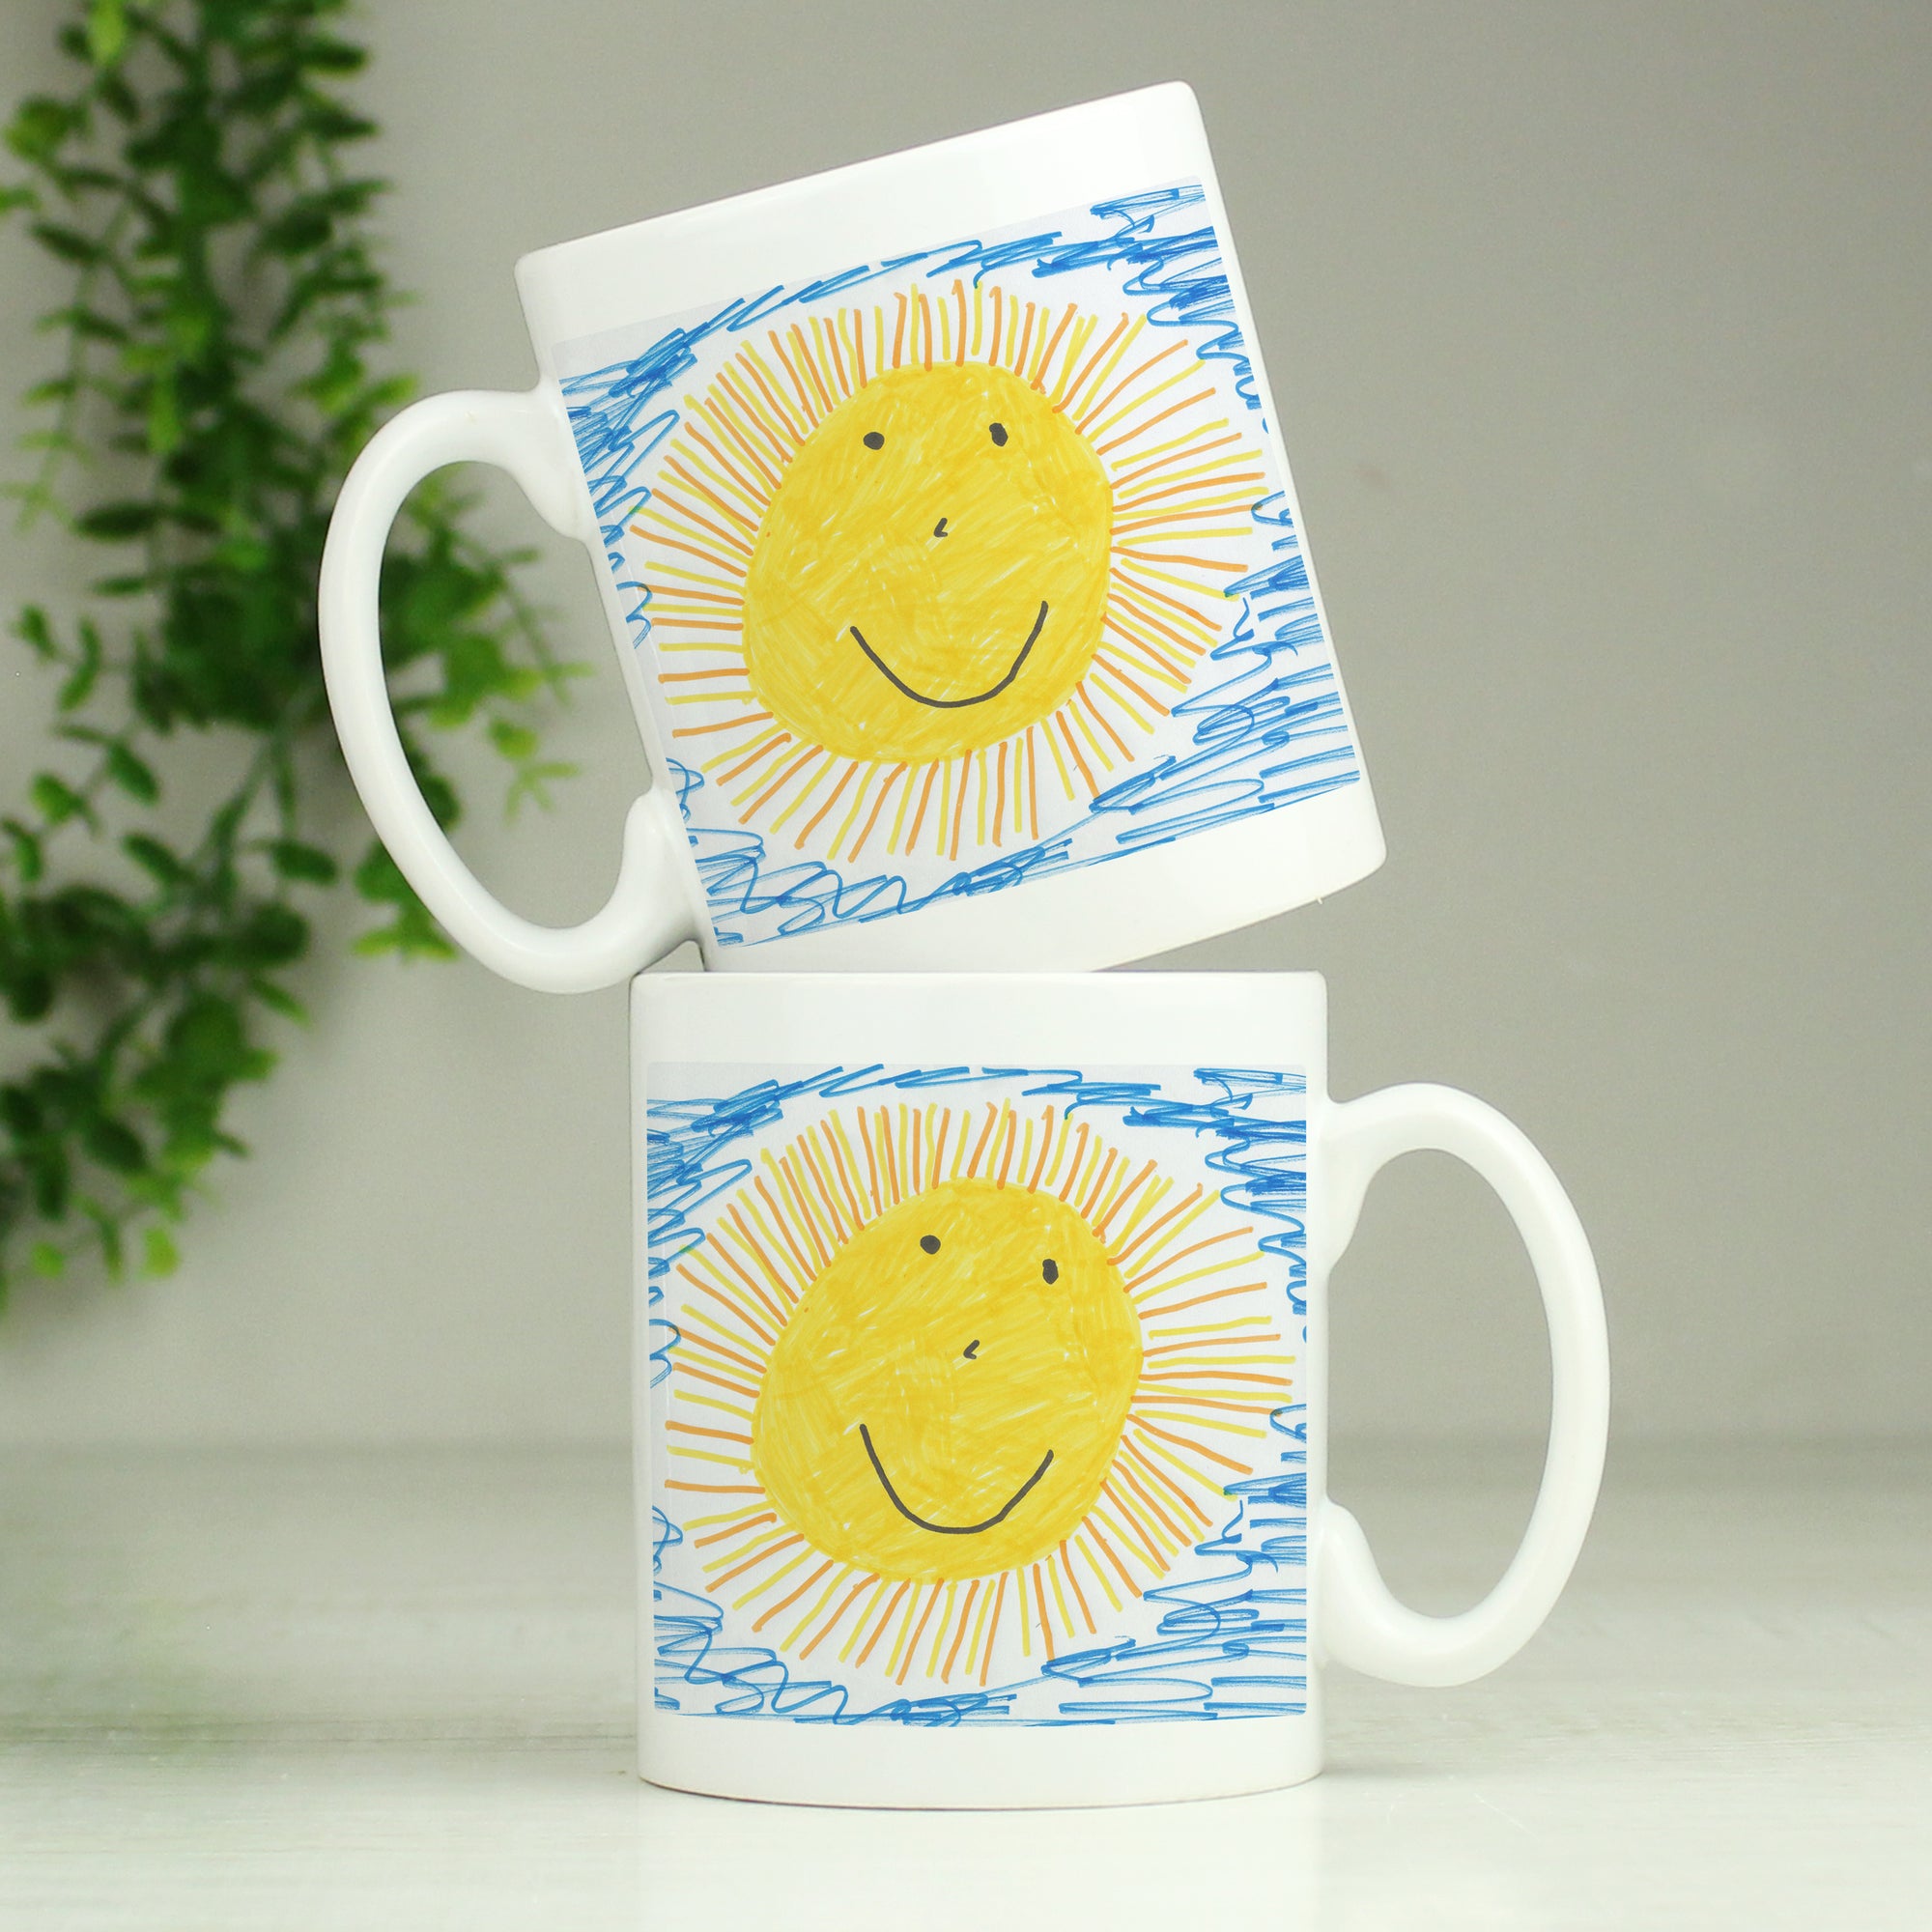 Image of a mug that can be printed with your child's own drawing on the front of the mug. You can choose to add your own message on the back of the mug or the drawing can also be printed on the reverse as well as the front.